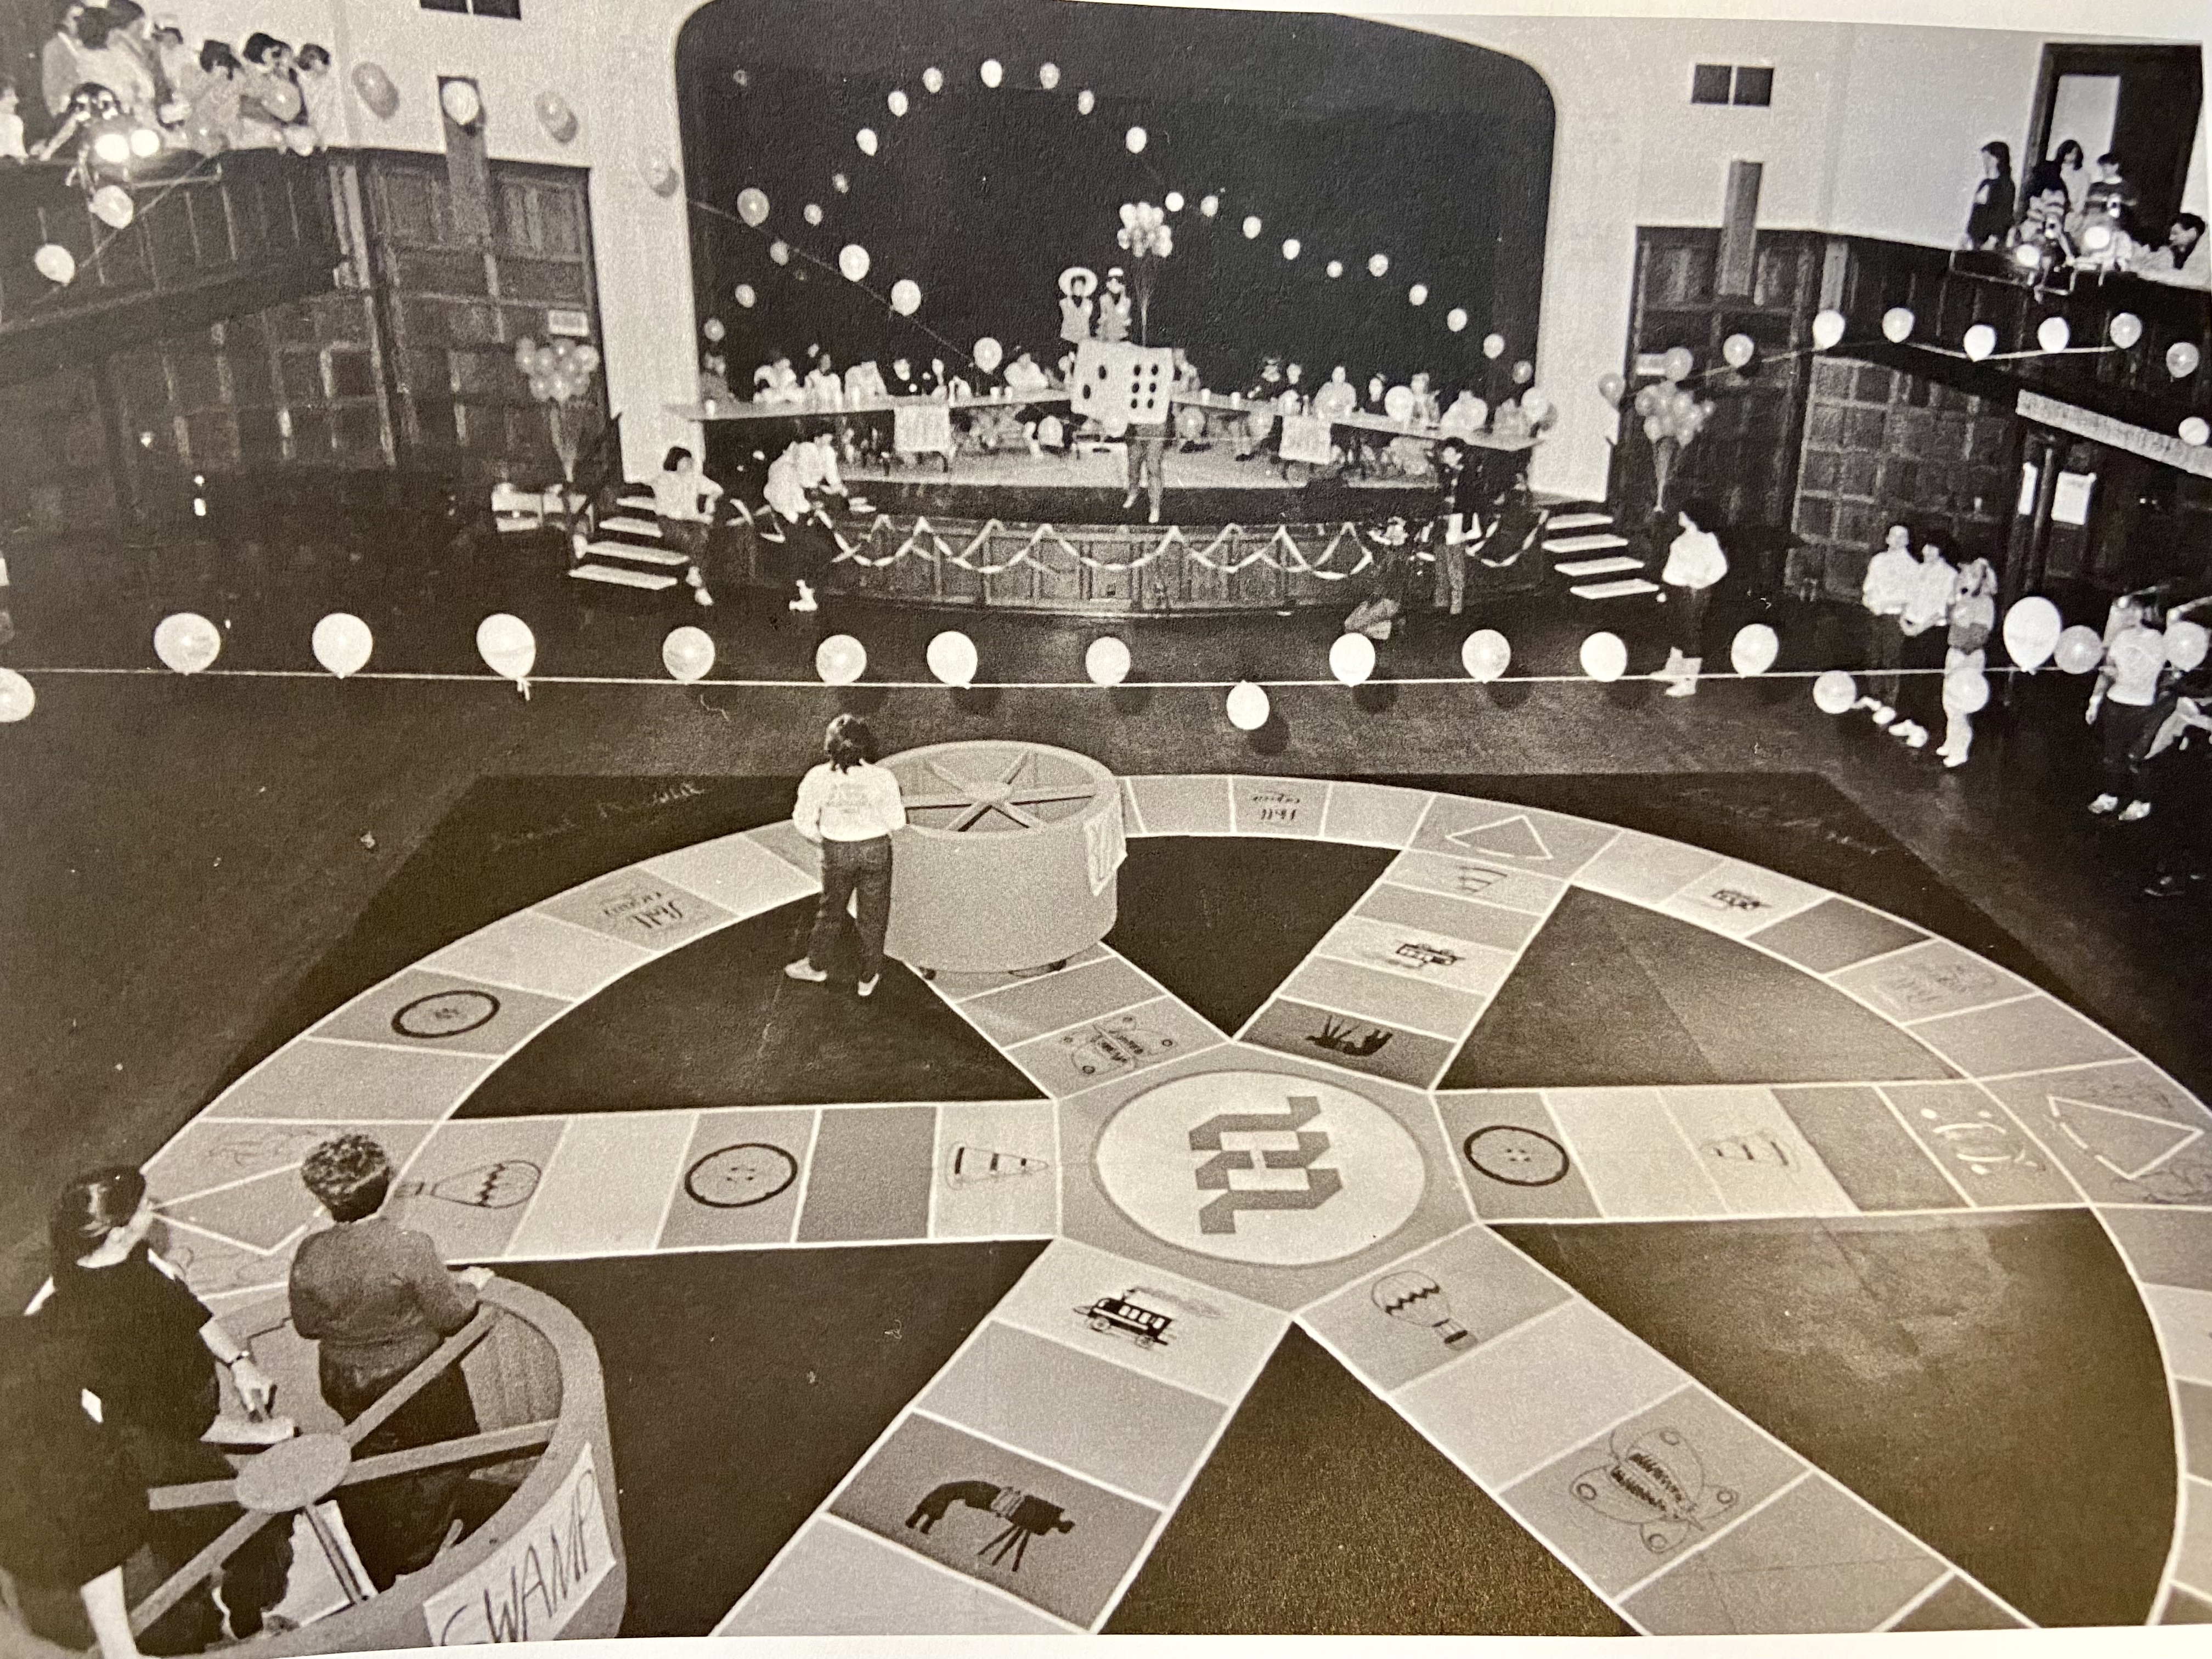 black and white image of large Trivial Pursuit game board built by students during J-term.